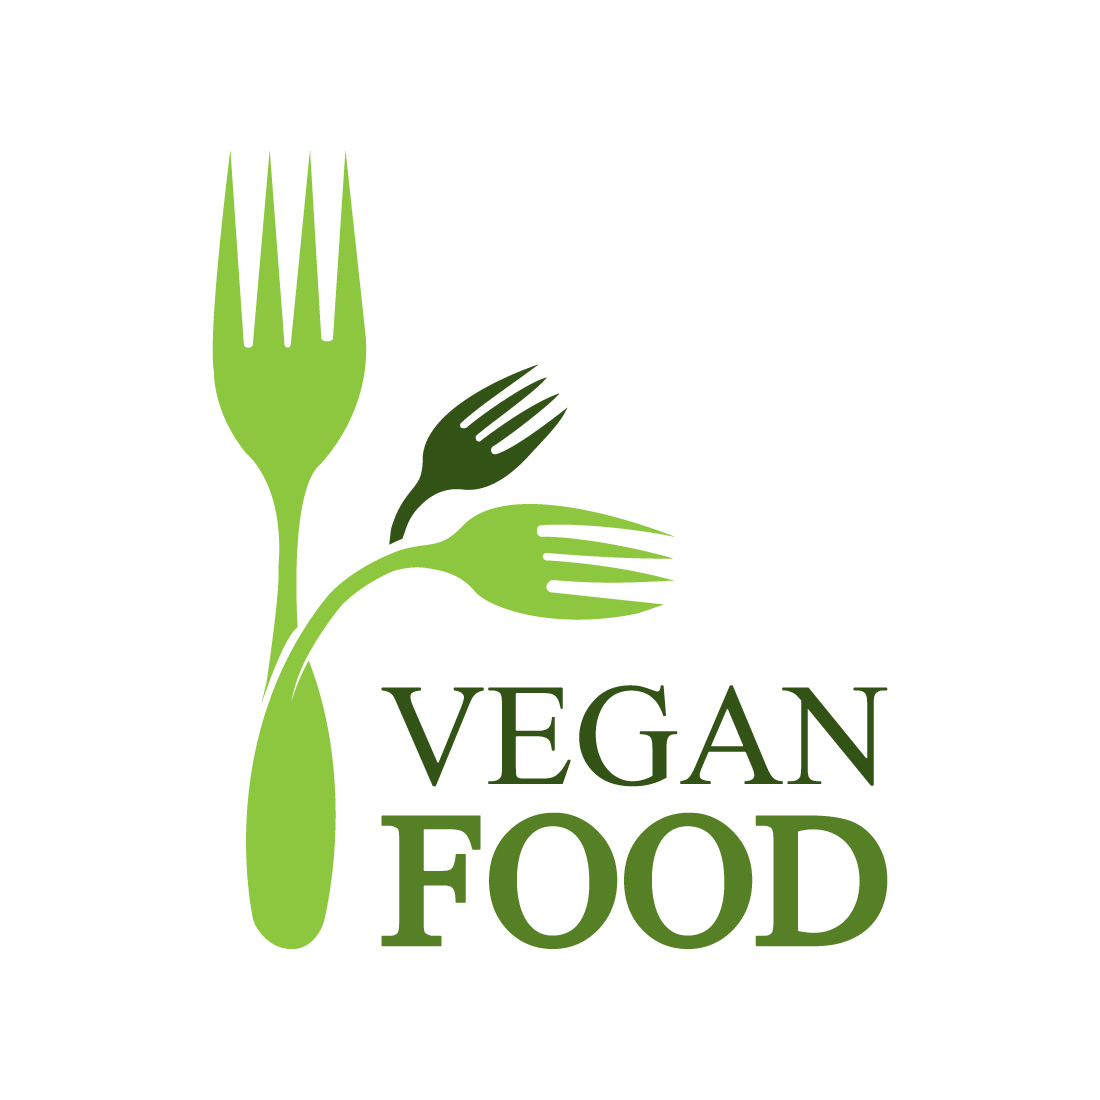 Natural Vegan food logo design vector images Organic food logo design Best Natural food logo best icon template illustration Chinees food best icon design preview image.